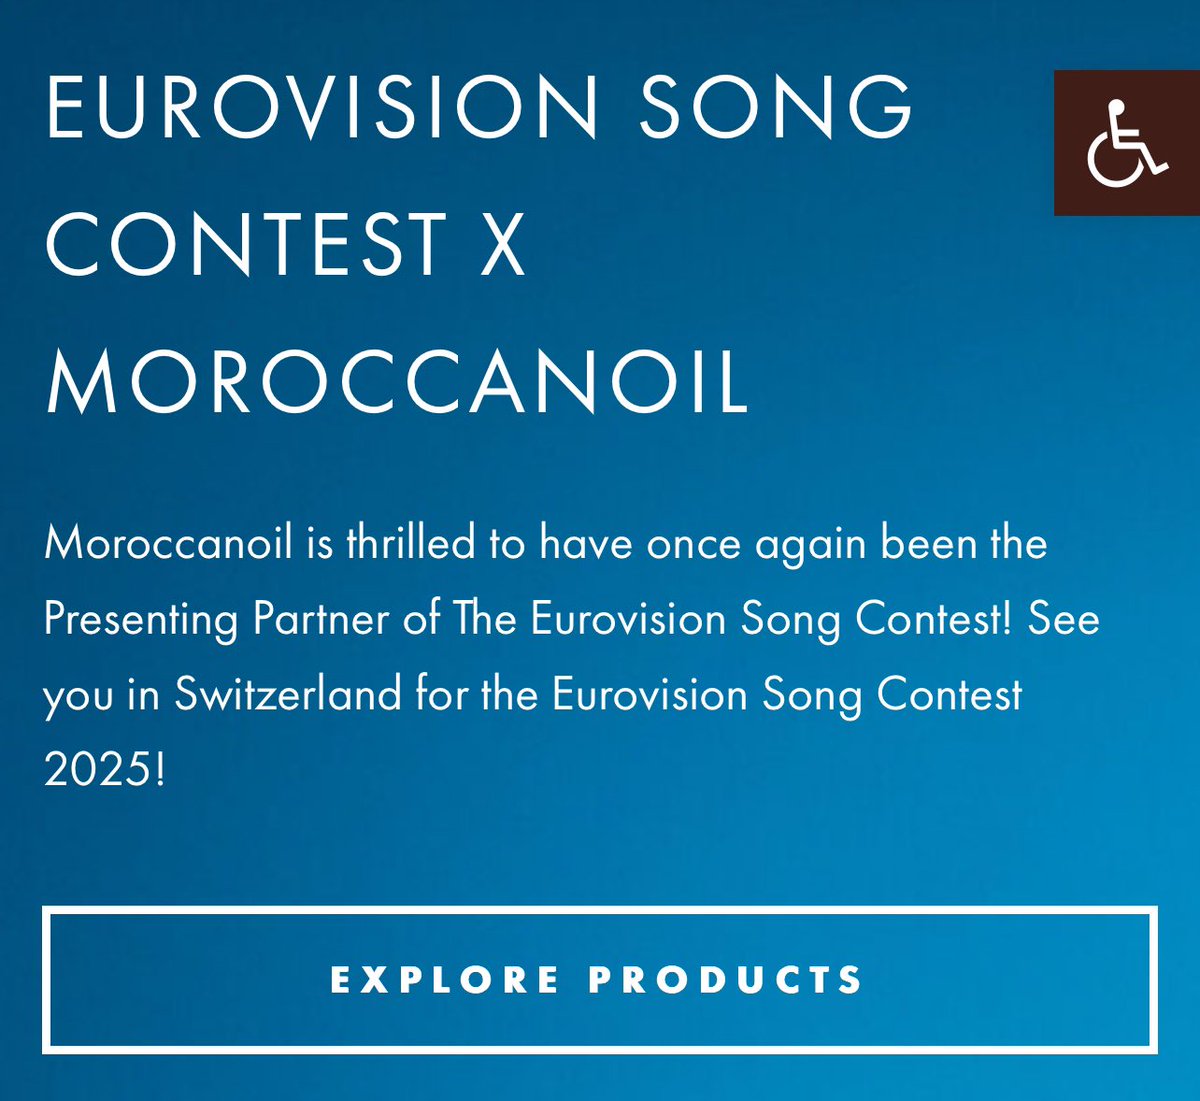 Wow what an absolutely hellish and horrible bit of news to get back from vacation to…

#BoycottEurovision